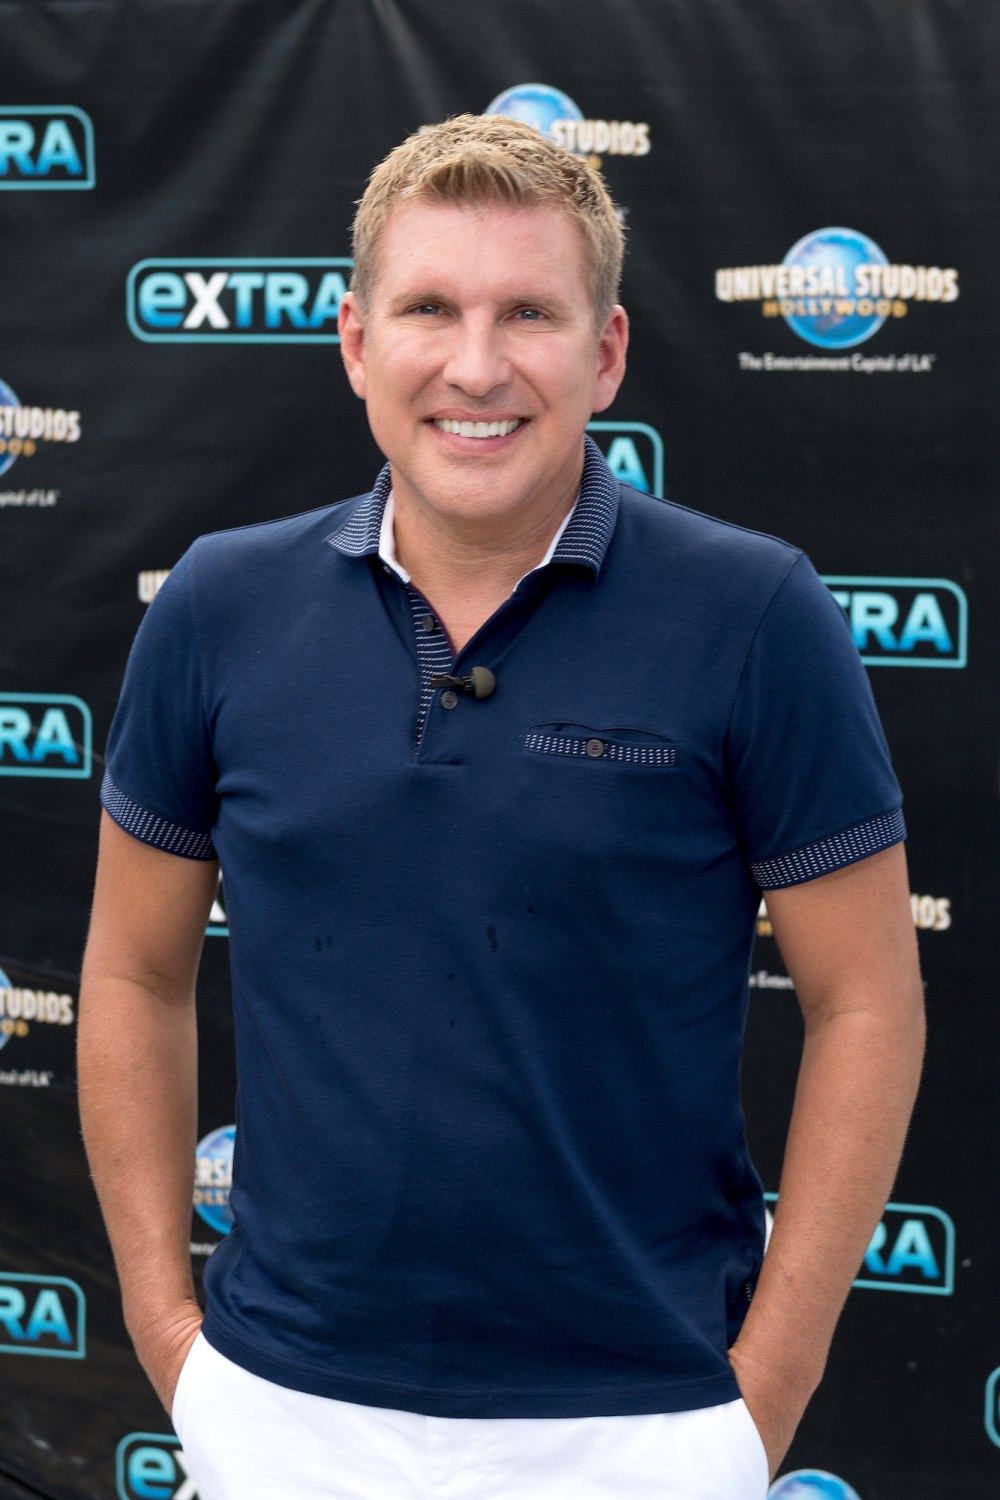 Todd Chrisley was ordered to pay $755,000 for defaming Tax Investigator Online